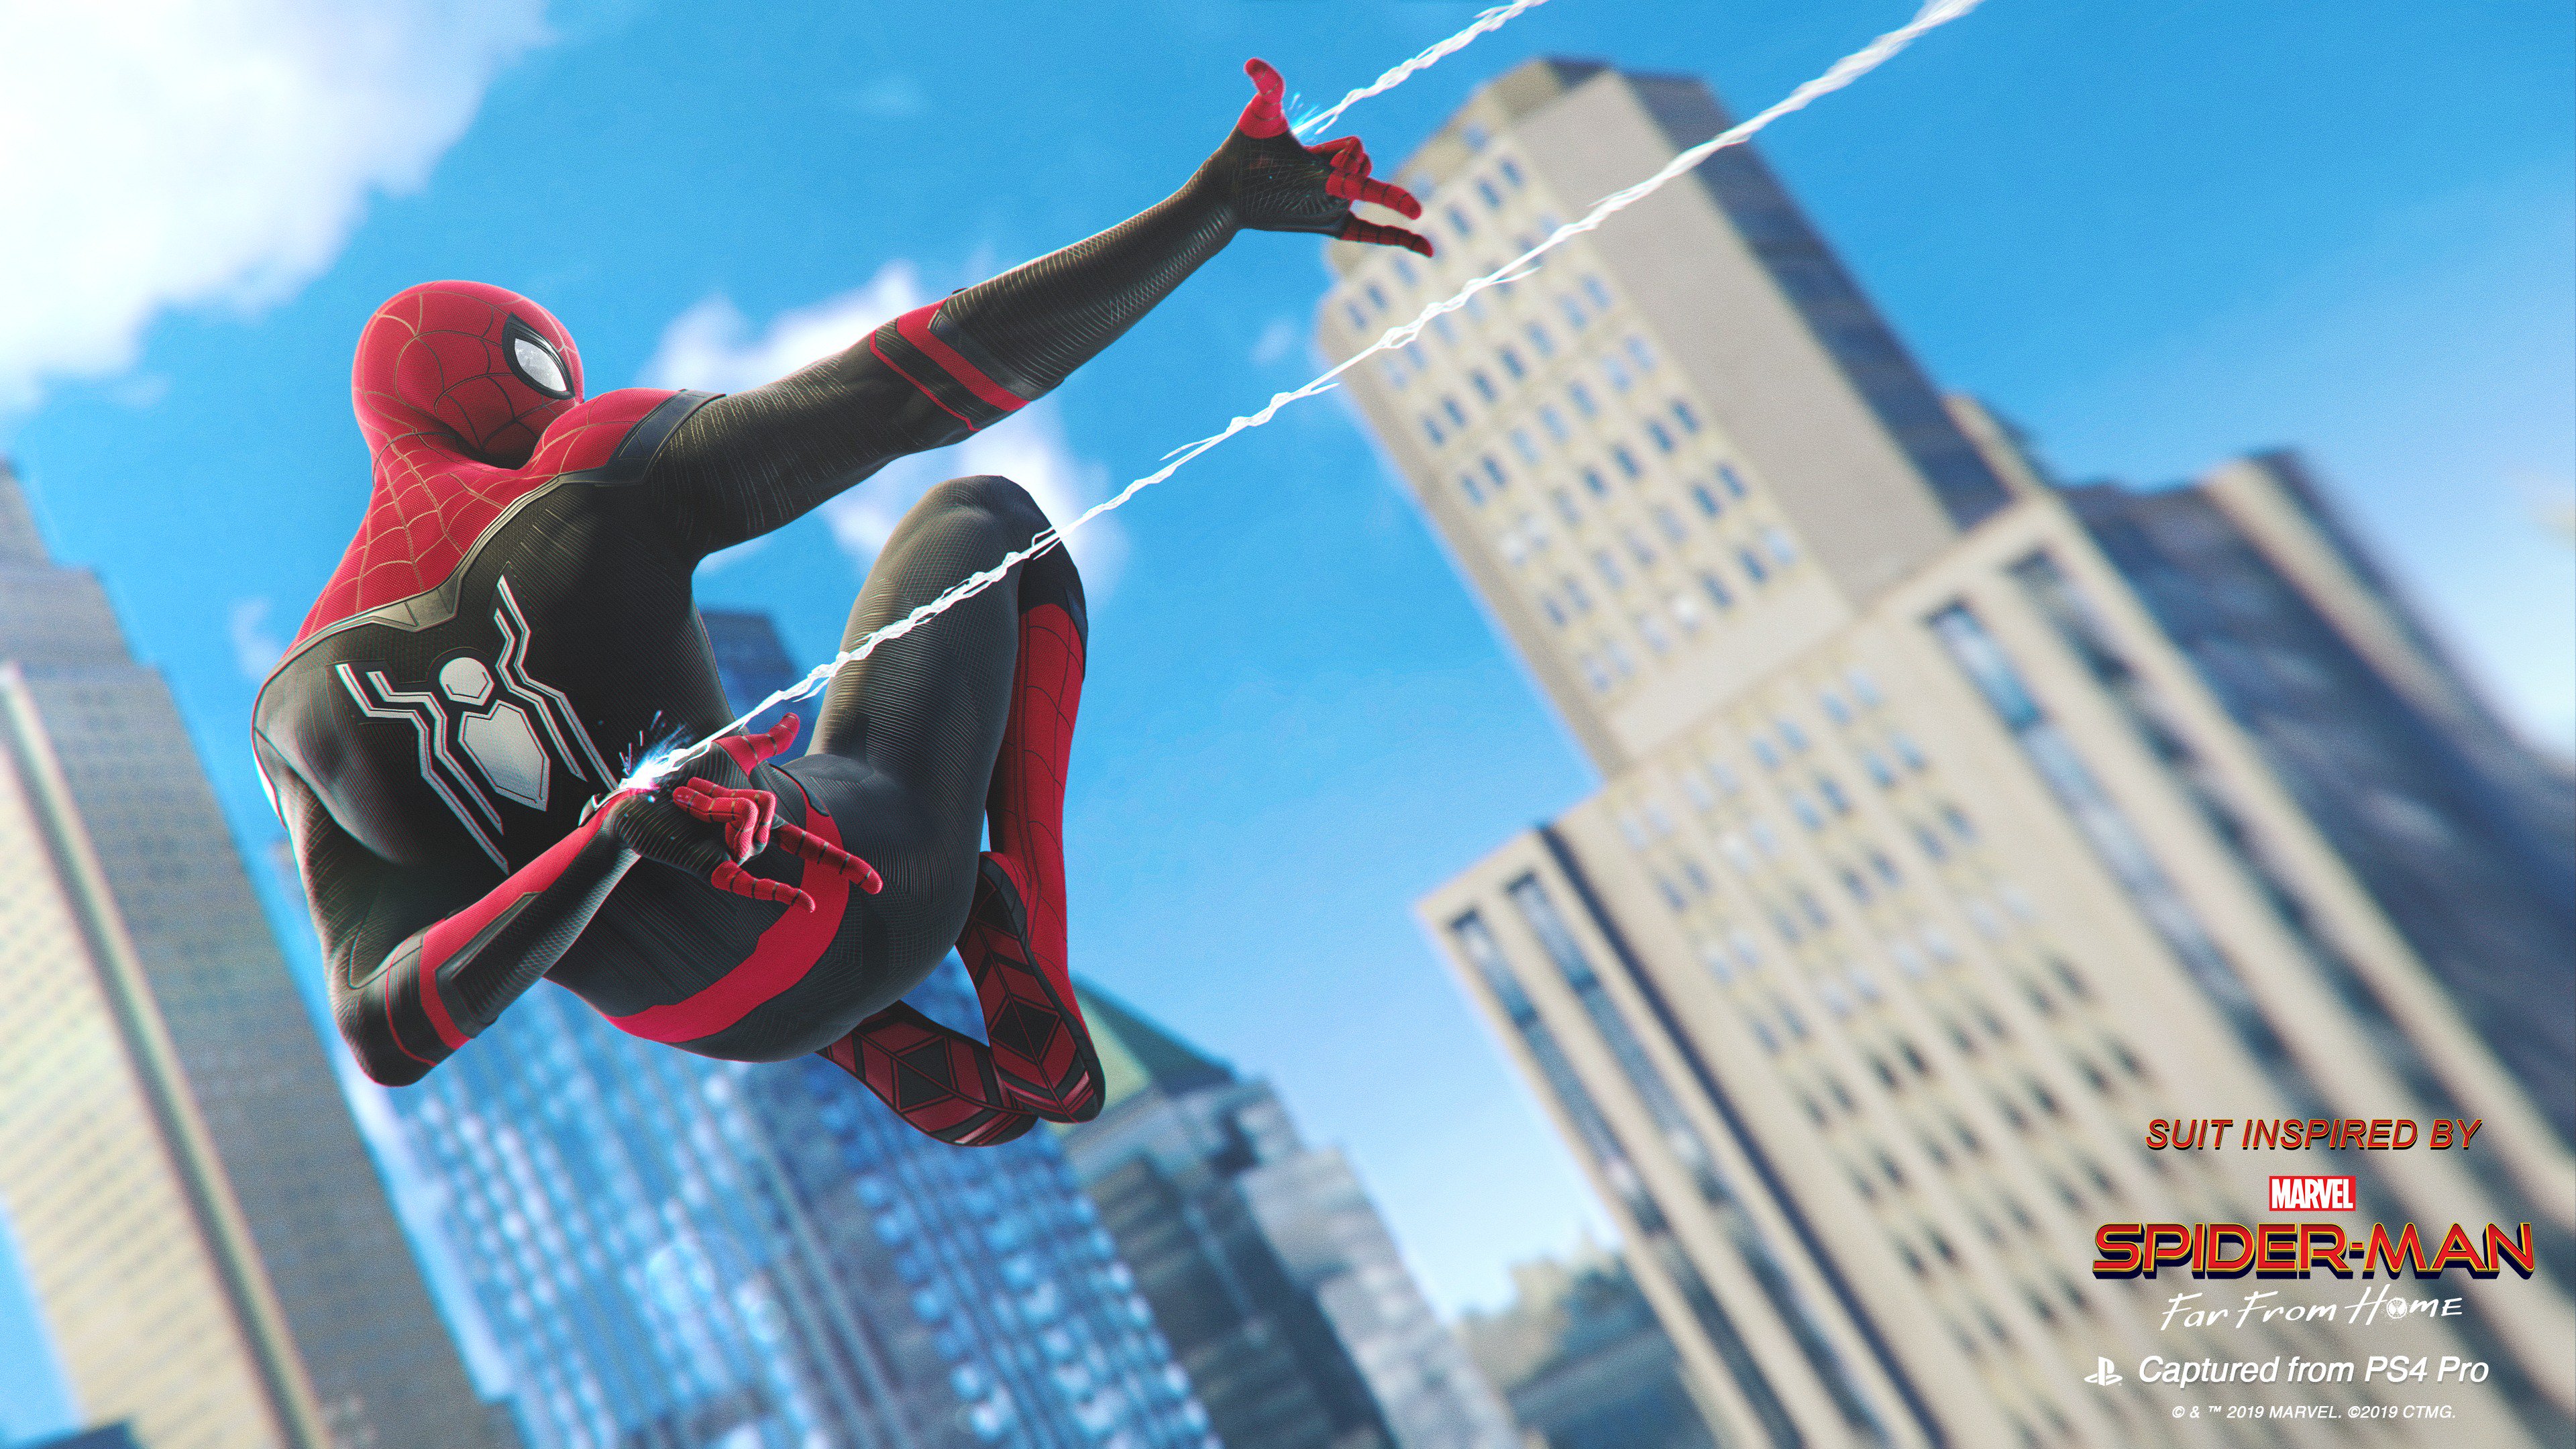 Insomniac Games on Twitter: "Congratulations to @MarvelStudios @SonyPictures on the release of Spider-Man: Far From Home. In celebration, we have added two suits inspired by the movie in a #SpiderManPS4 update.